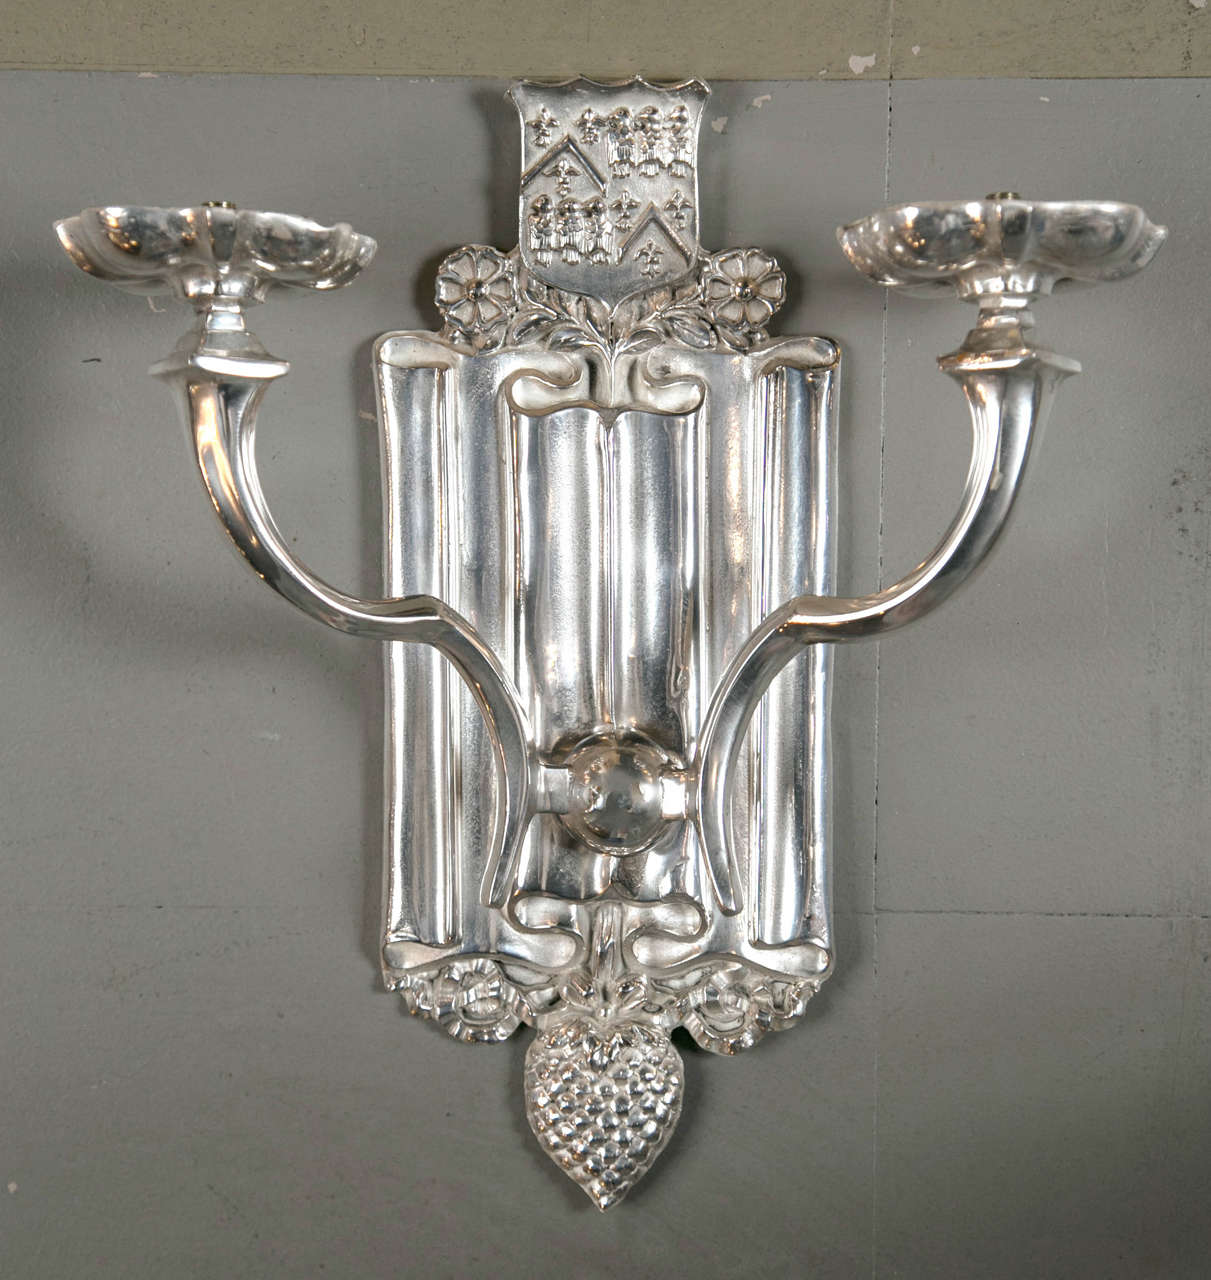 Pair of circa 1920s Caldwell sconces, with shields atop. Eight available.